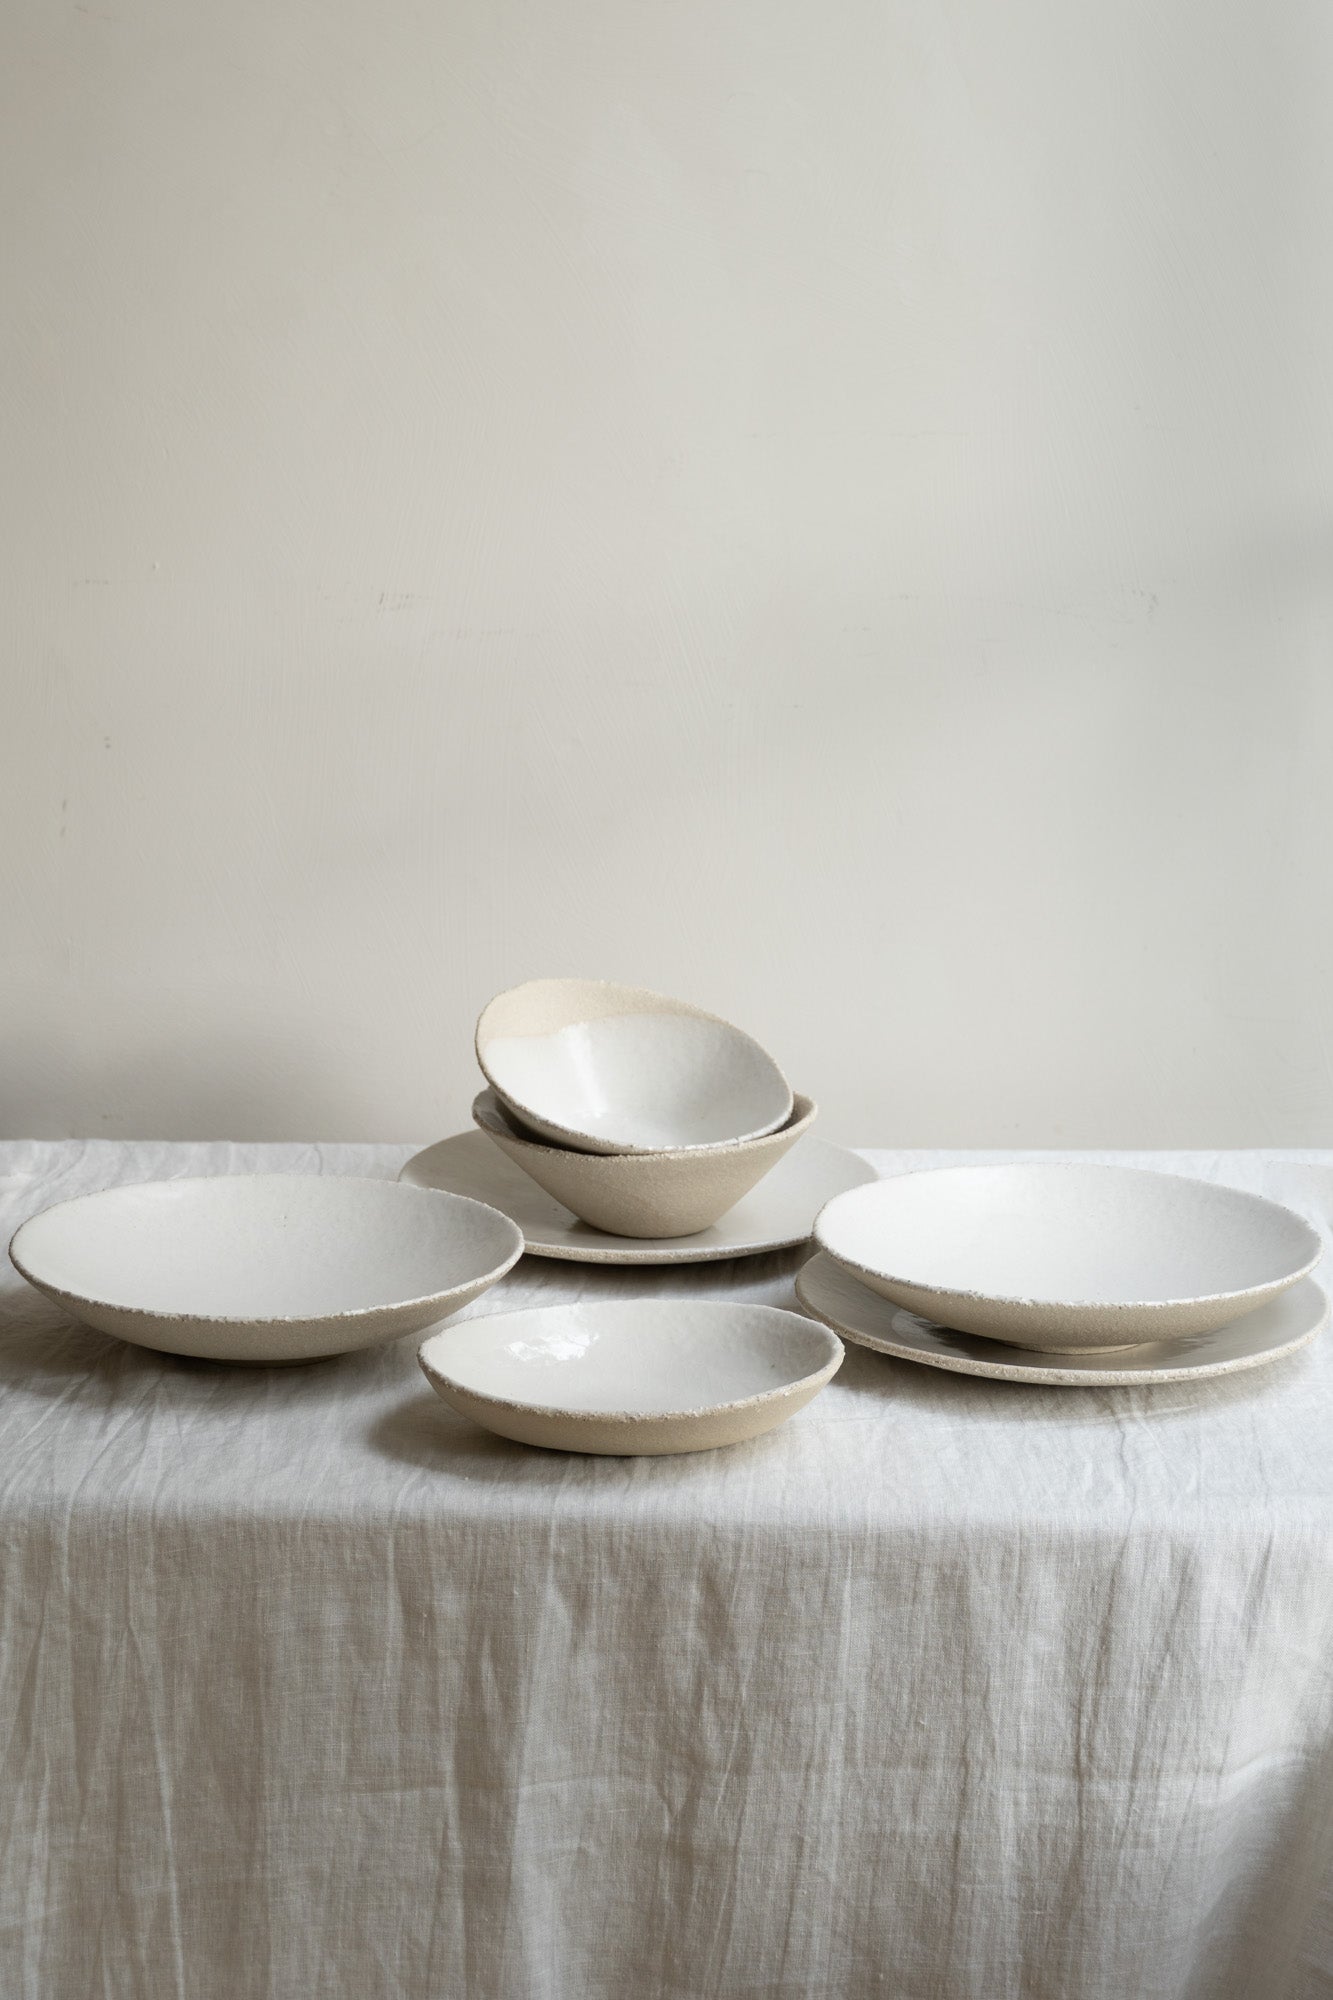 Table with white linen cloth and selection of Wabi Plates by Jars Ceramistes.